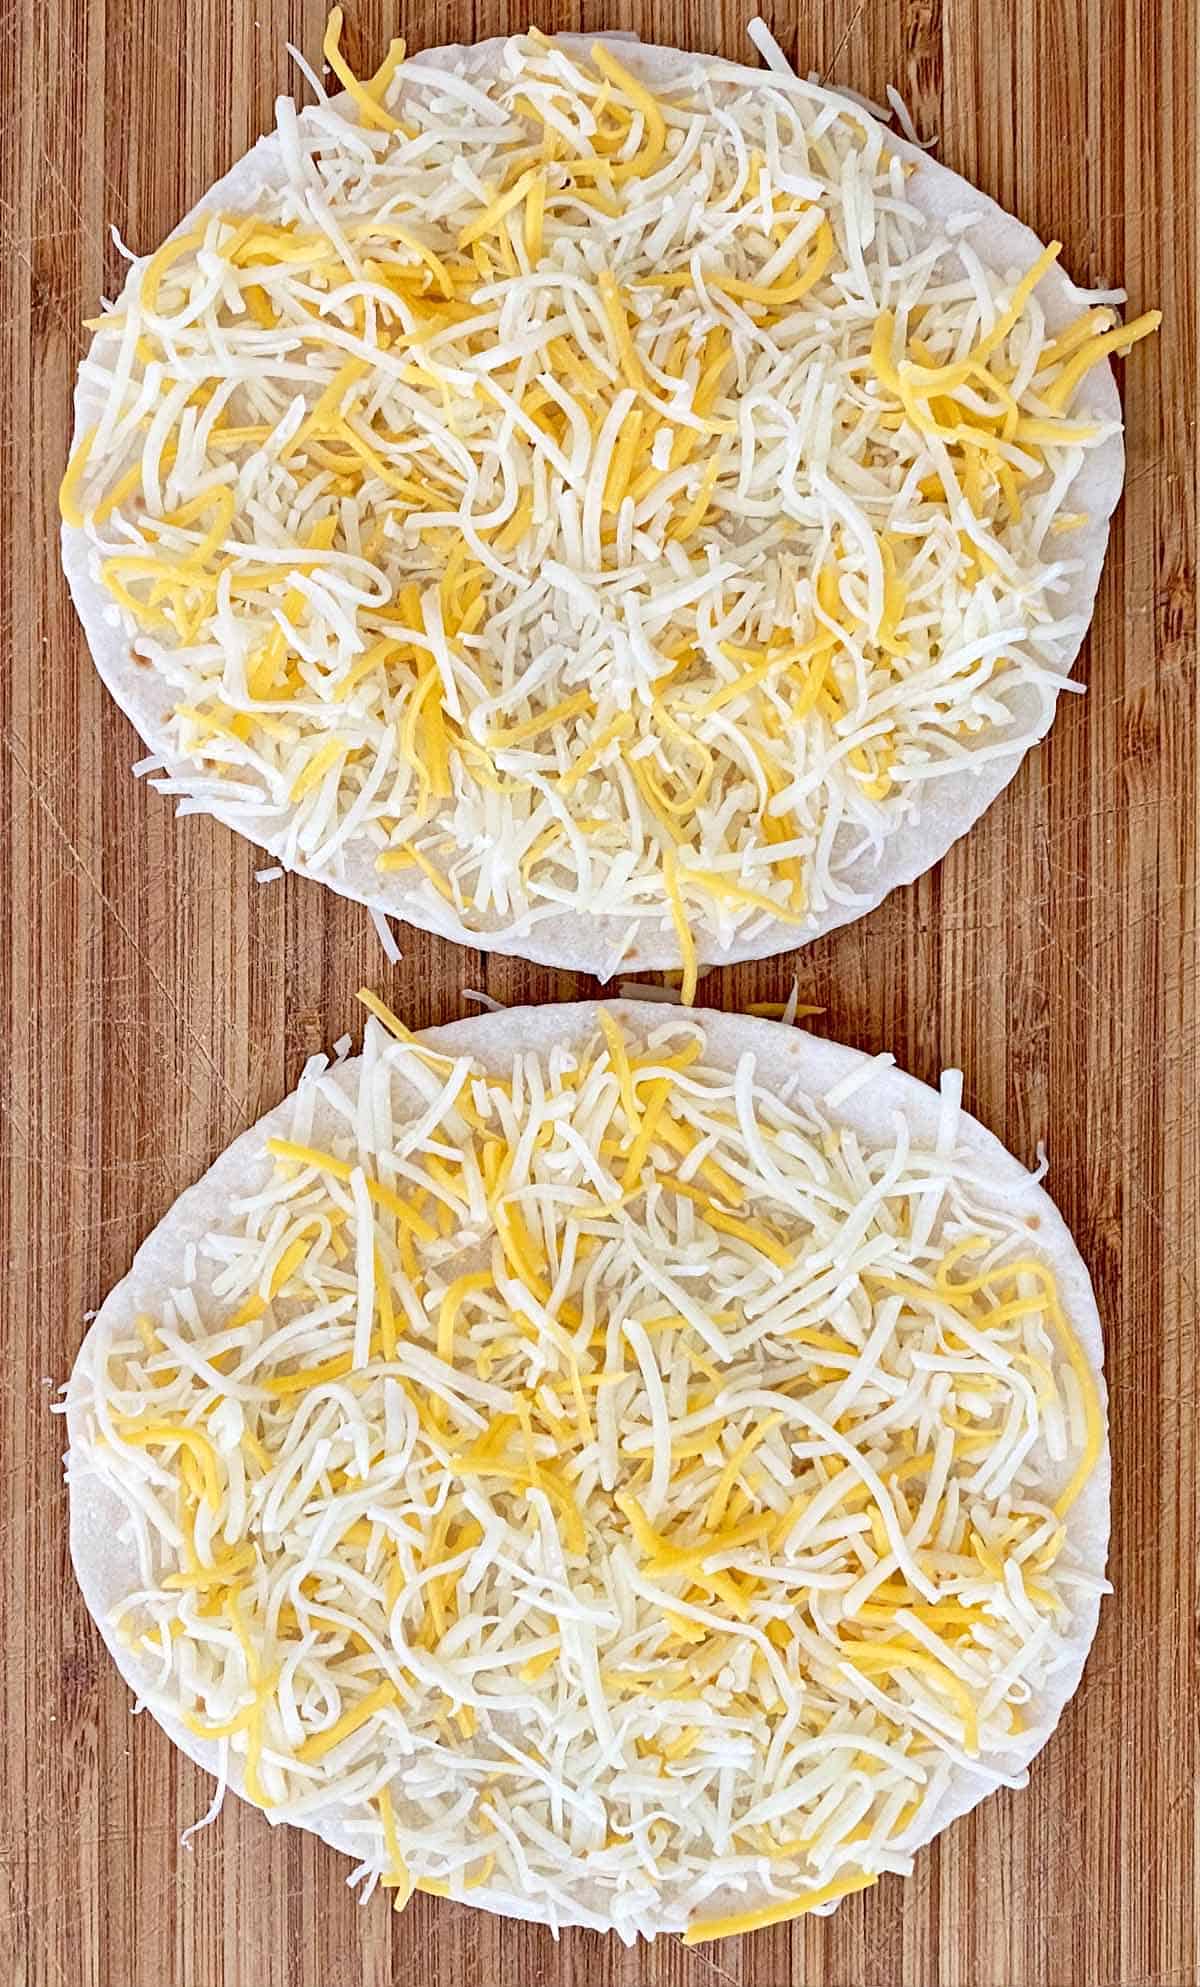 Two mini flour tortillas sprinkled with shredded cheddar cheese.